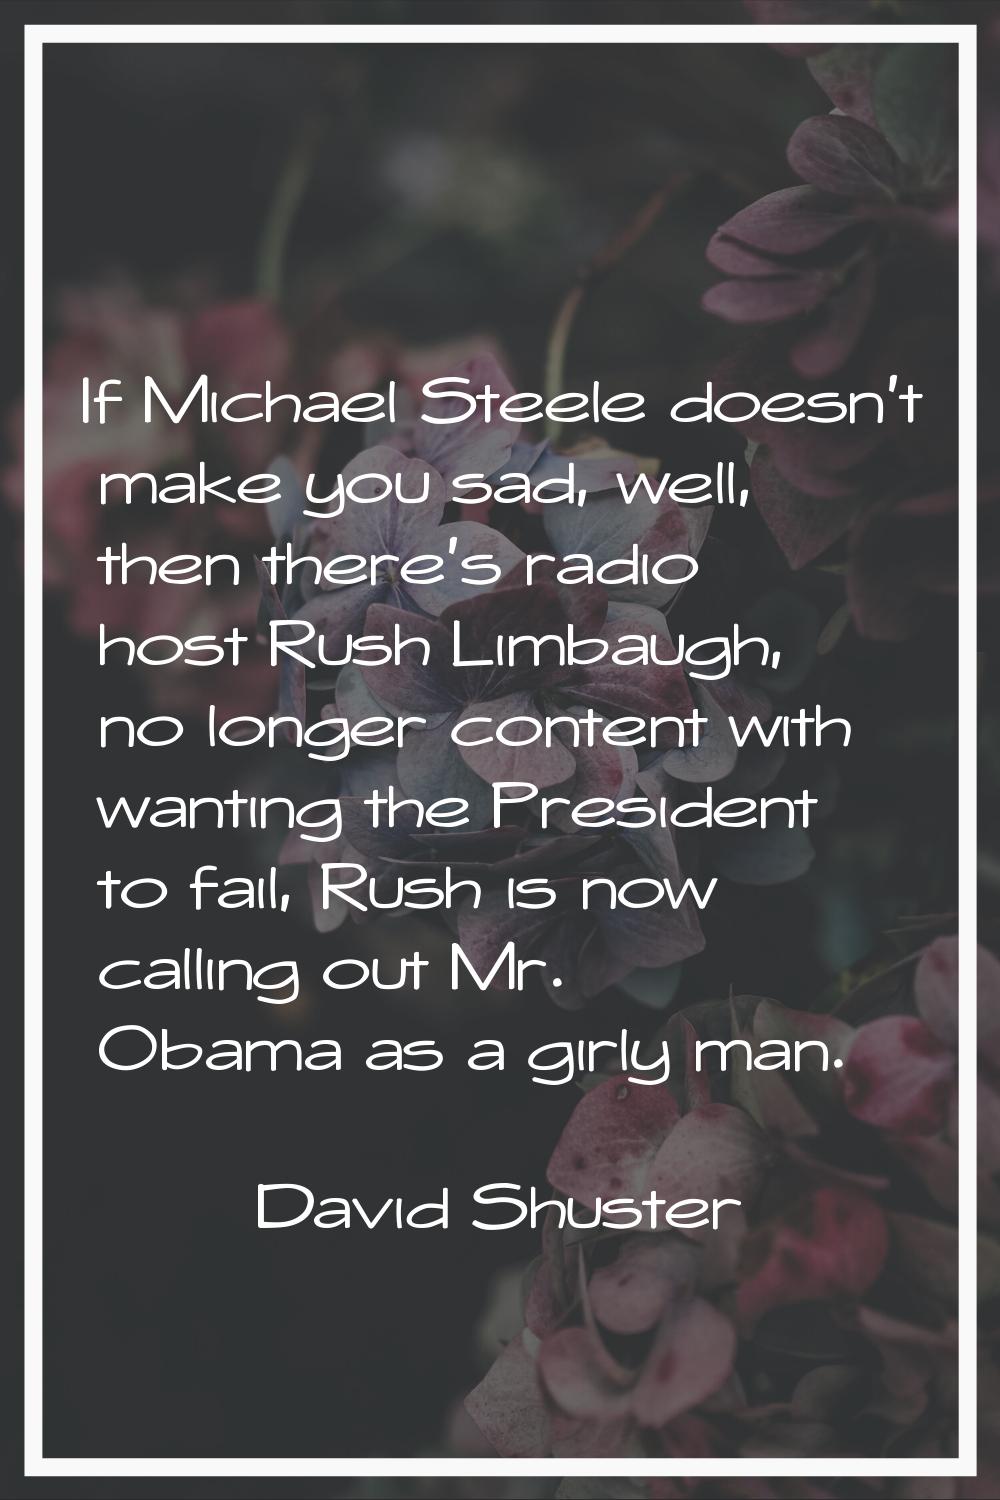 If Michael Steele doesn't make you sad, well, then there's radio host Rush Limbaugh, no longer cont